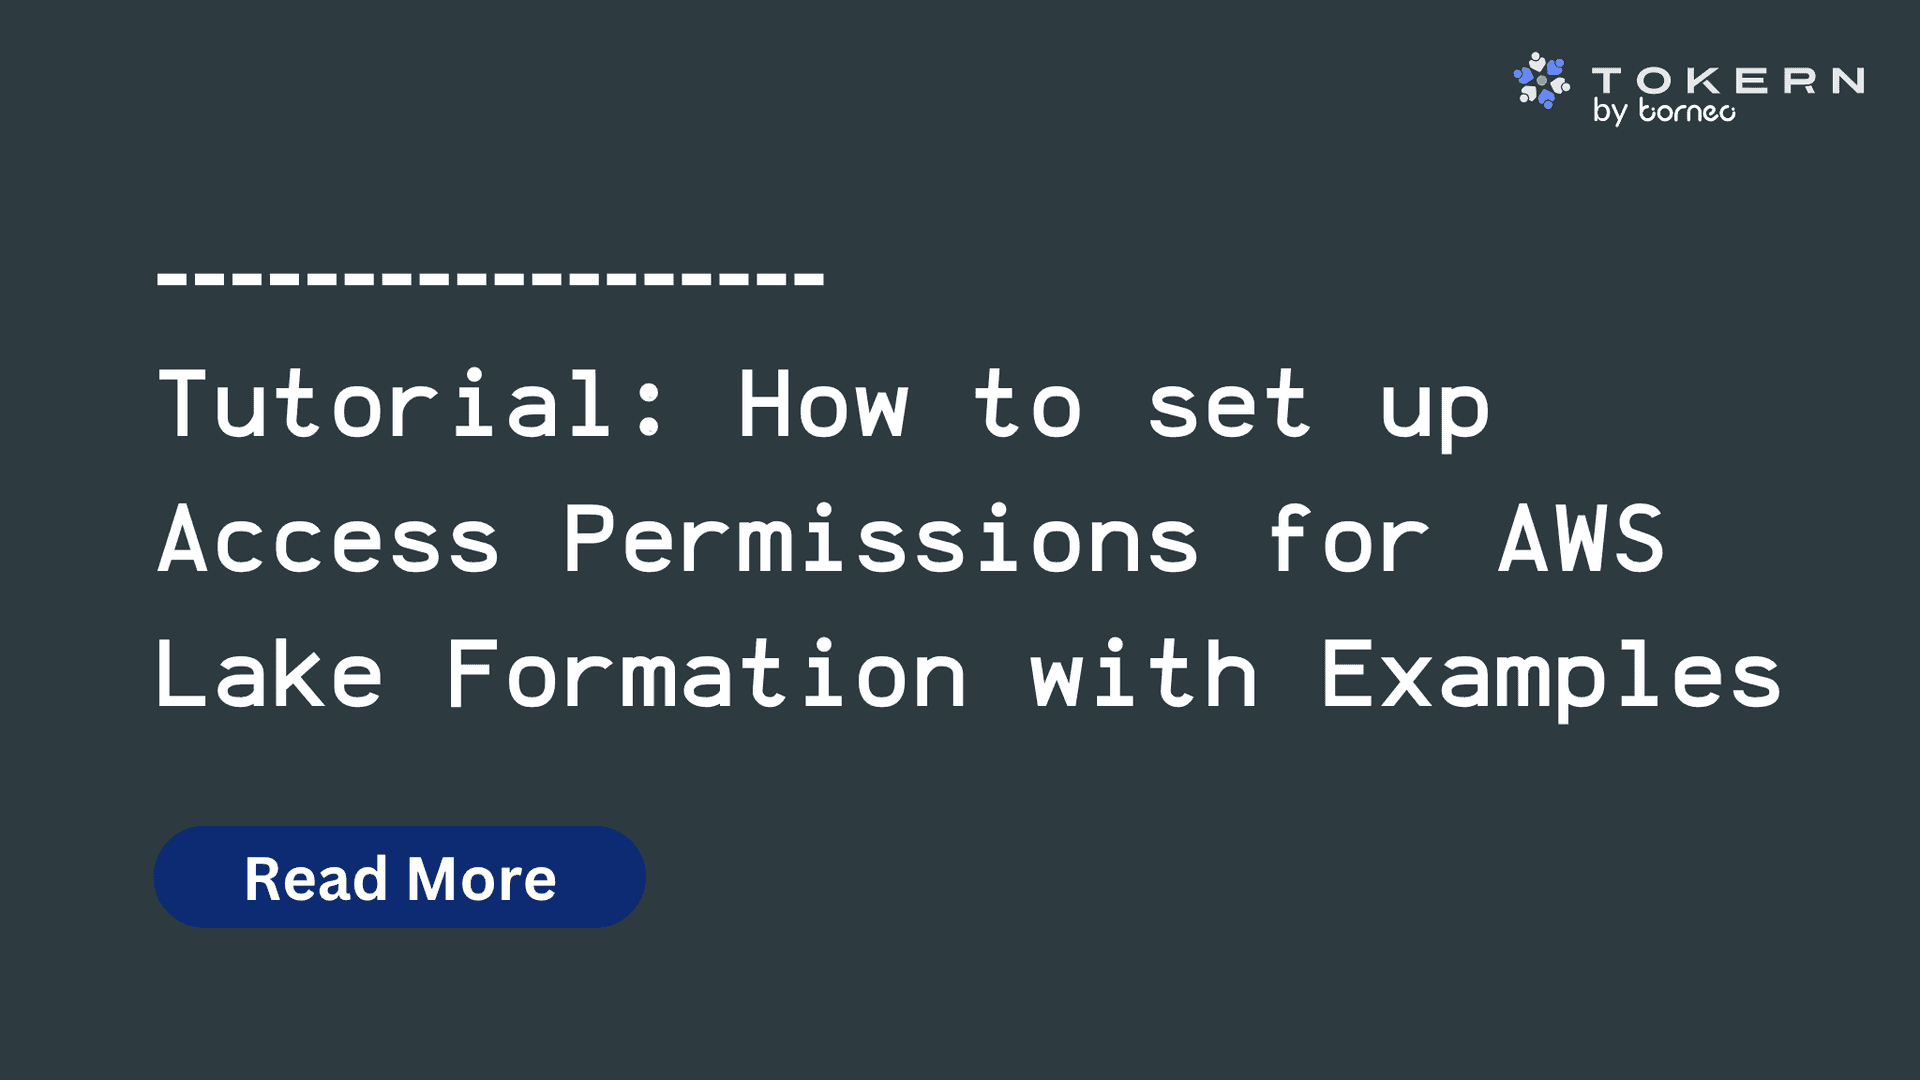 Tutorial_How_to_set_up_Access_Permissions_for_AWS_Lake_Formation_with_Examples_00f5144f56.png